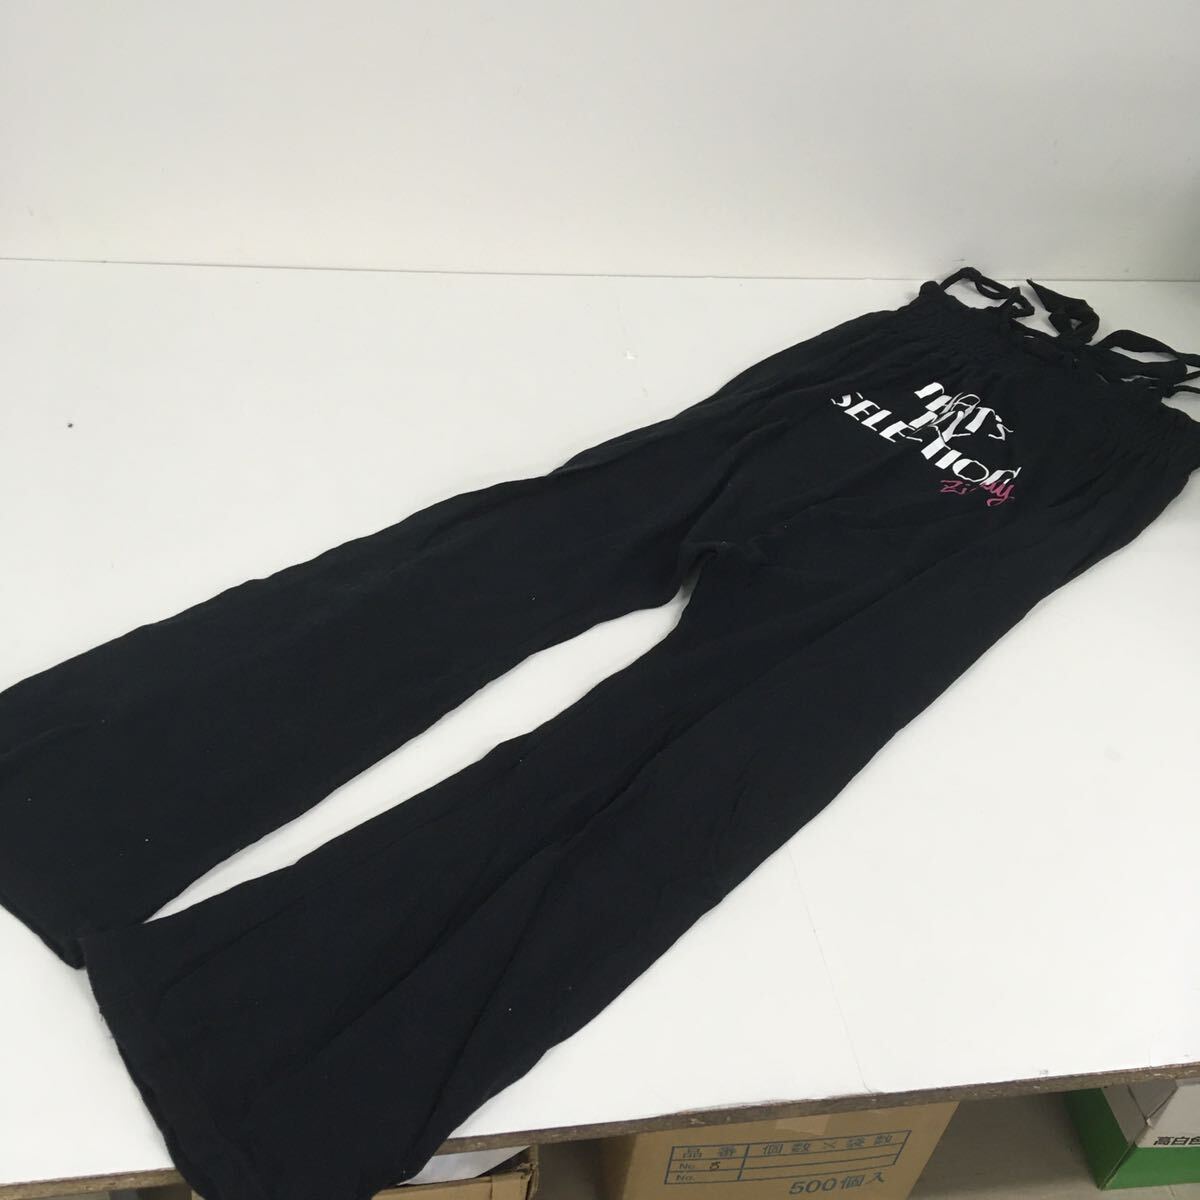  free shipping * pants overall One-piece * girl Kids child 150* black * coveralls One-piece #60411sss